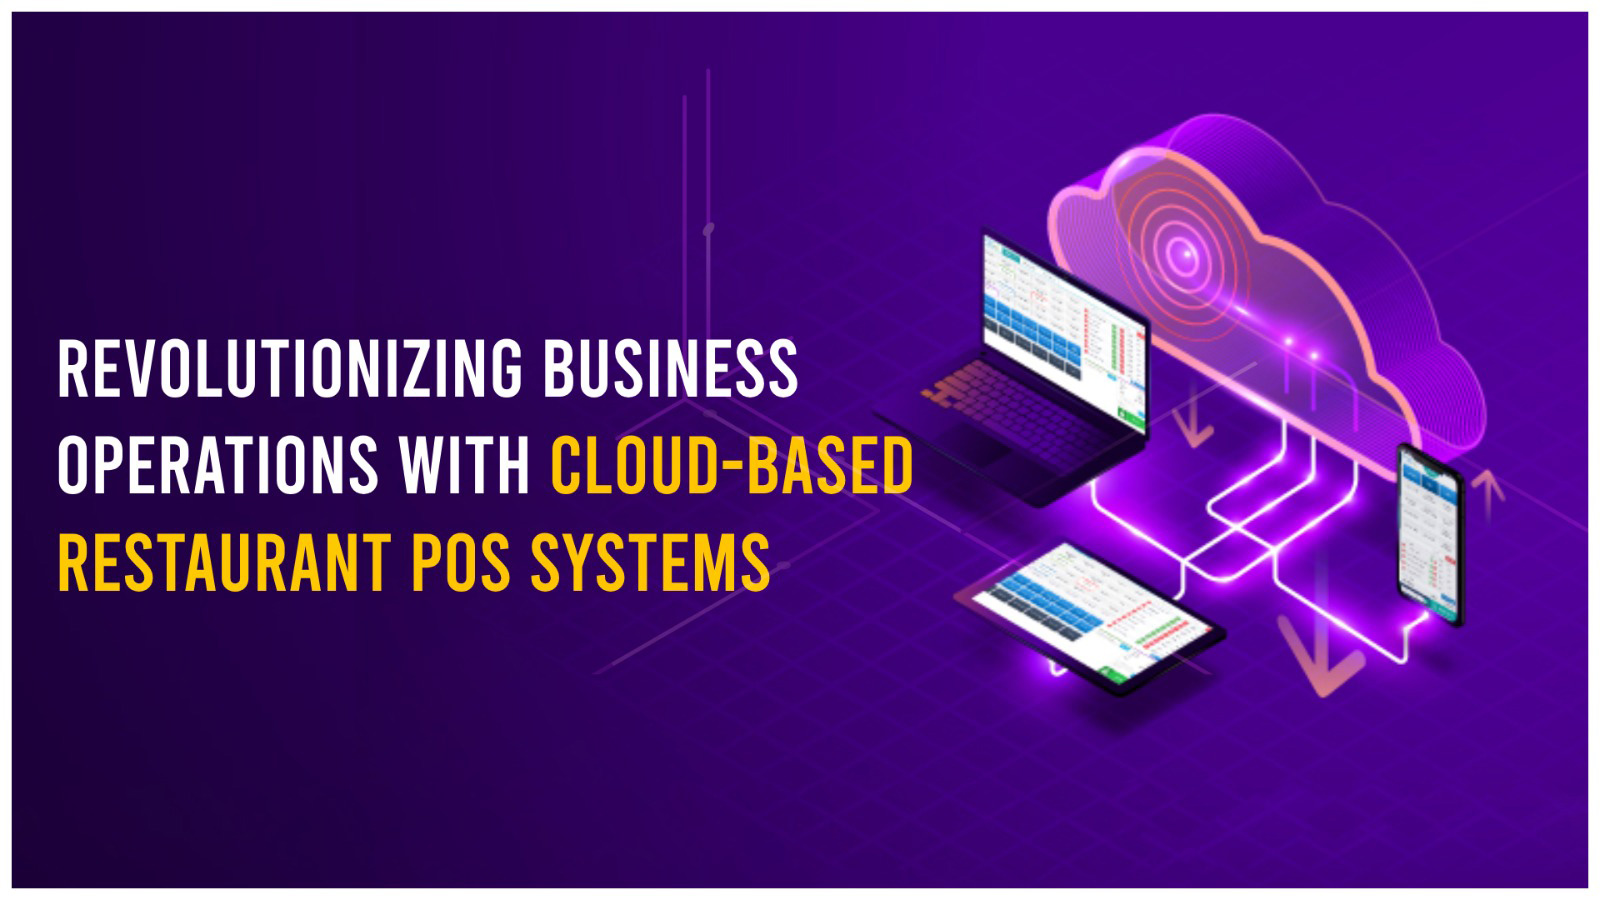 Revolutionizing Small Business Operations with Cloud-Based Restaurant POS Systems